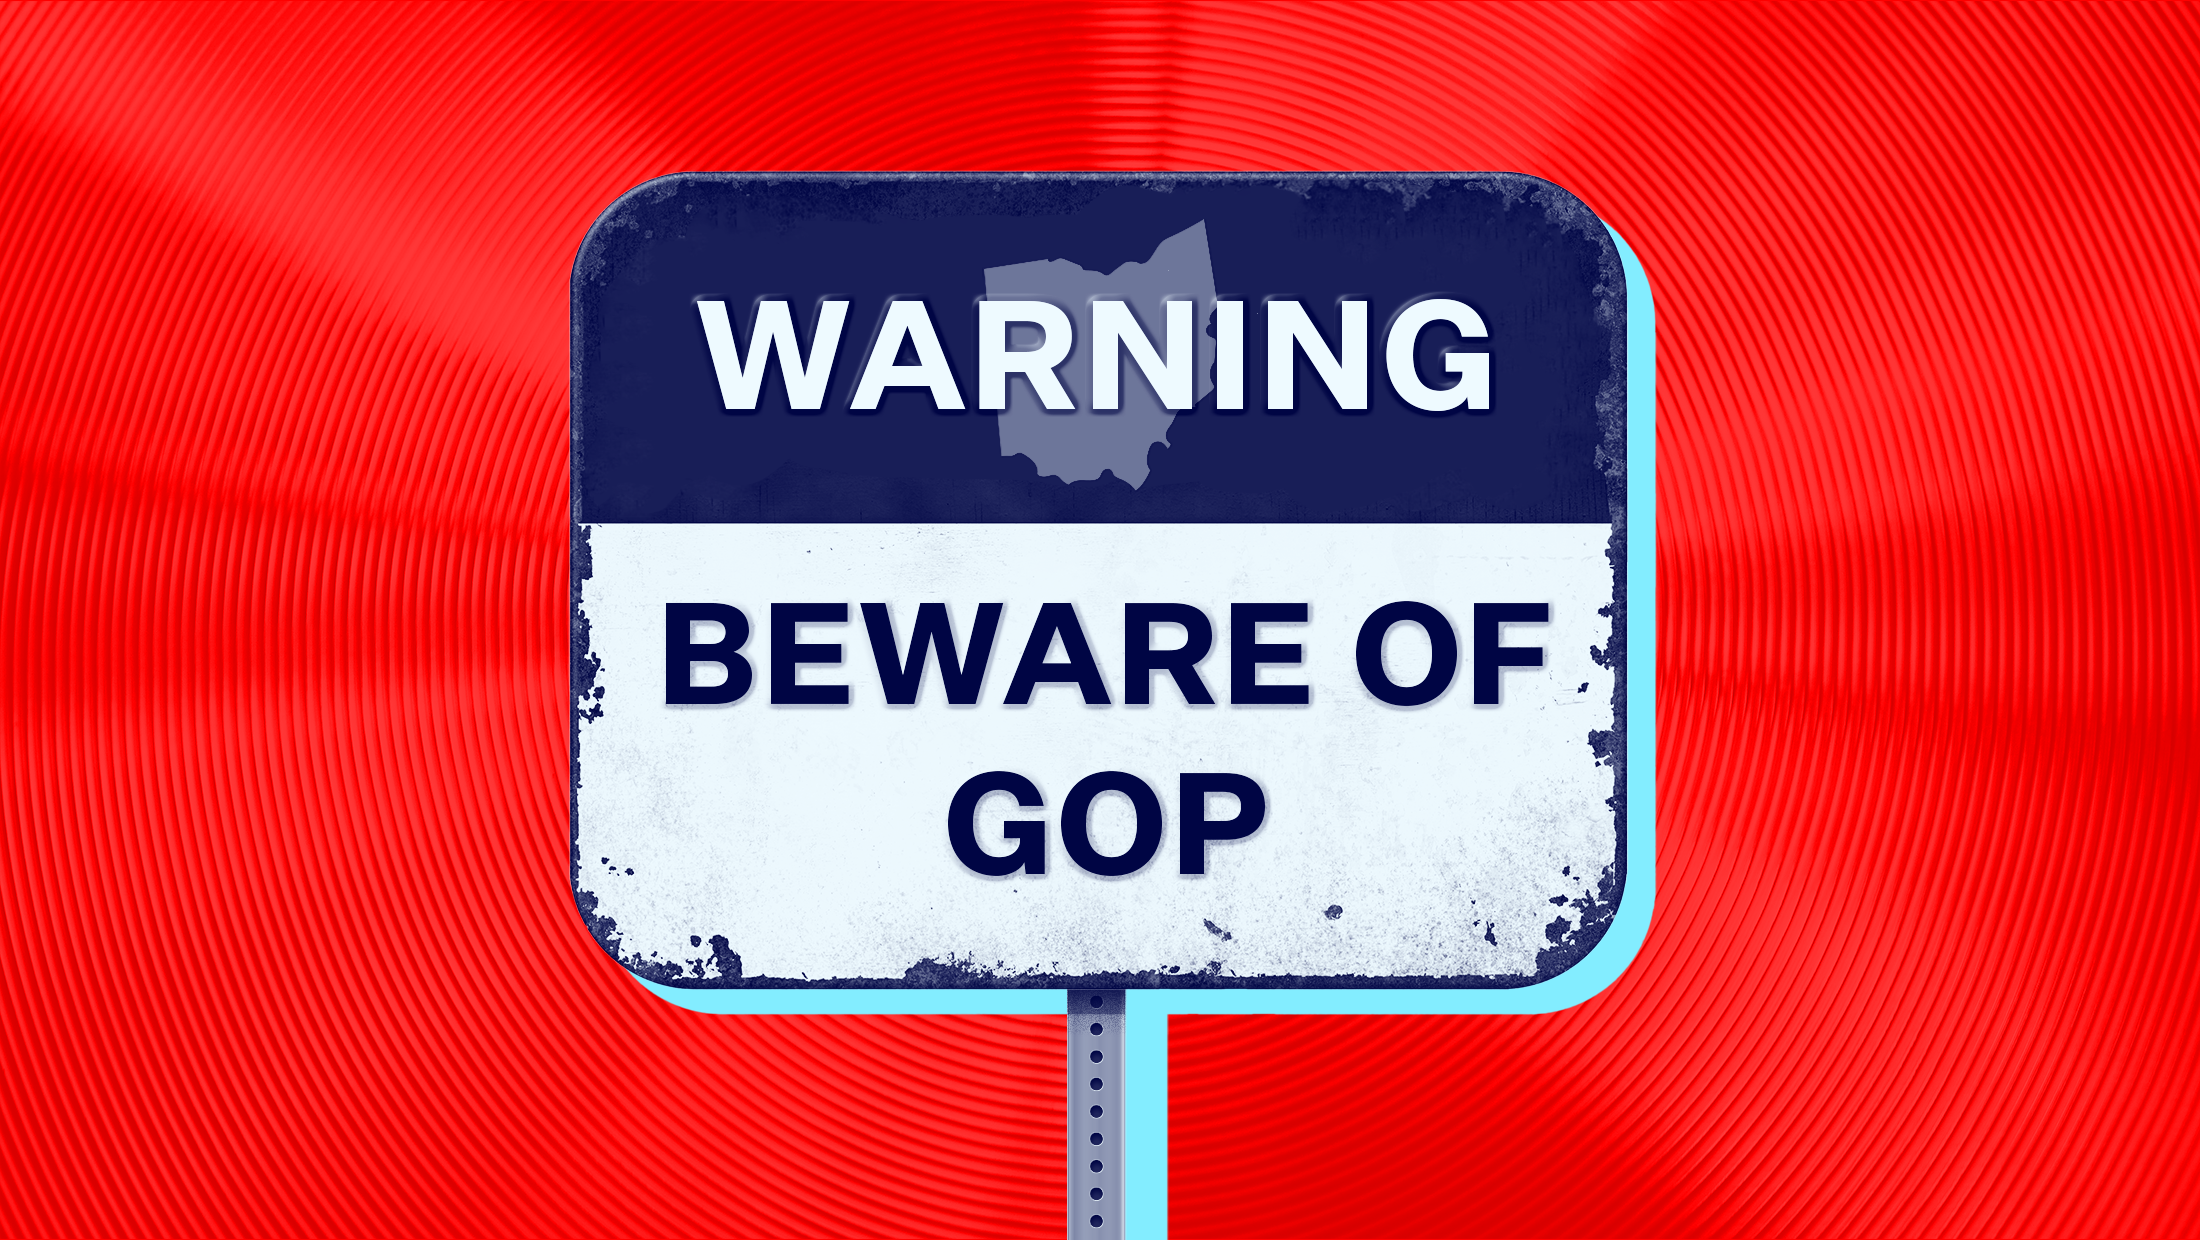 A sign on a red background with "Warning Beware of Ohio GOP" written on it over an outline of the state of Ohio.